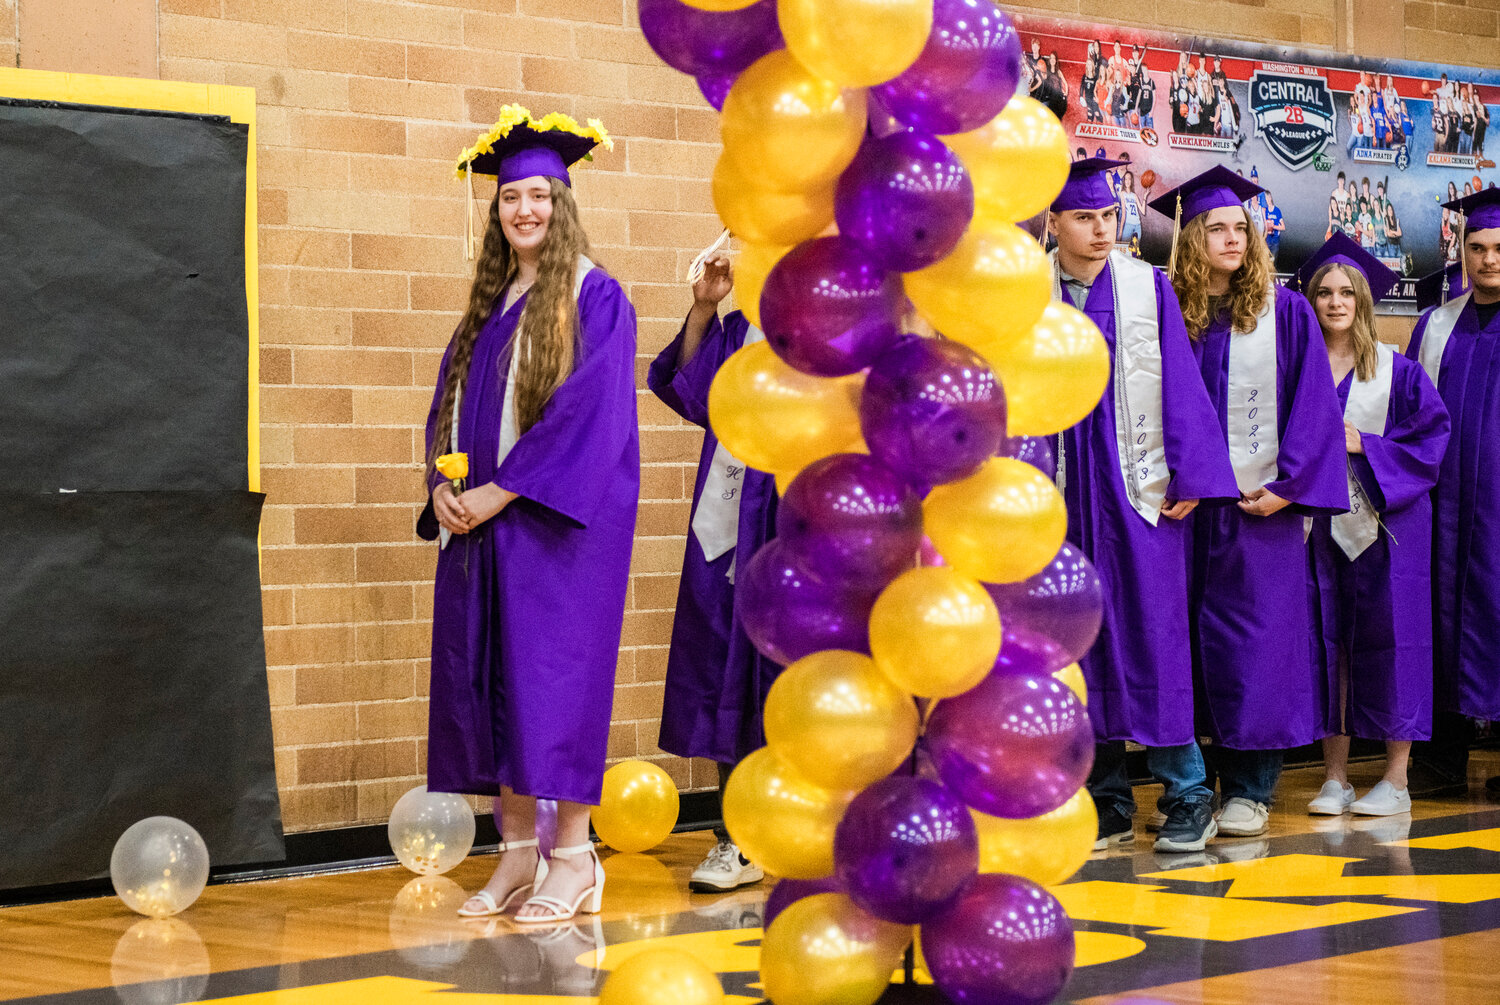 Onalaska High School Class senior Aurora Ray Sweazy prepares to lead the Class of 2023 down the center of the gym to graduate on Friday night. Sweazy was recognized as one of just a few Onalaska seniors who attended Running Start in school. She graduated with honors.